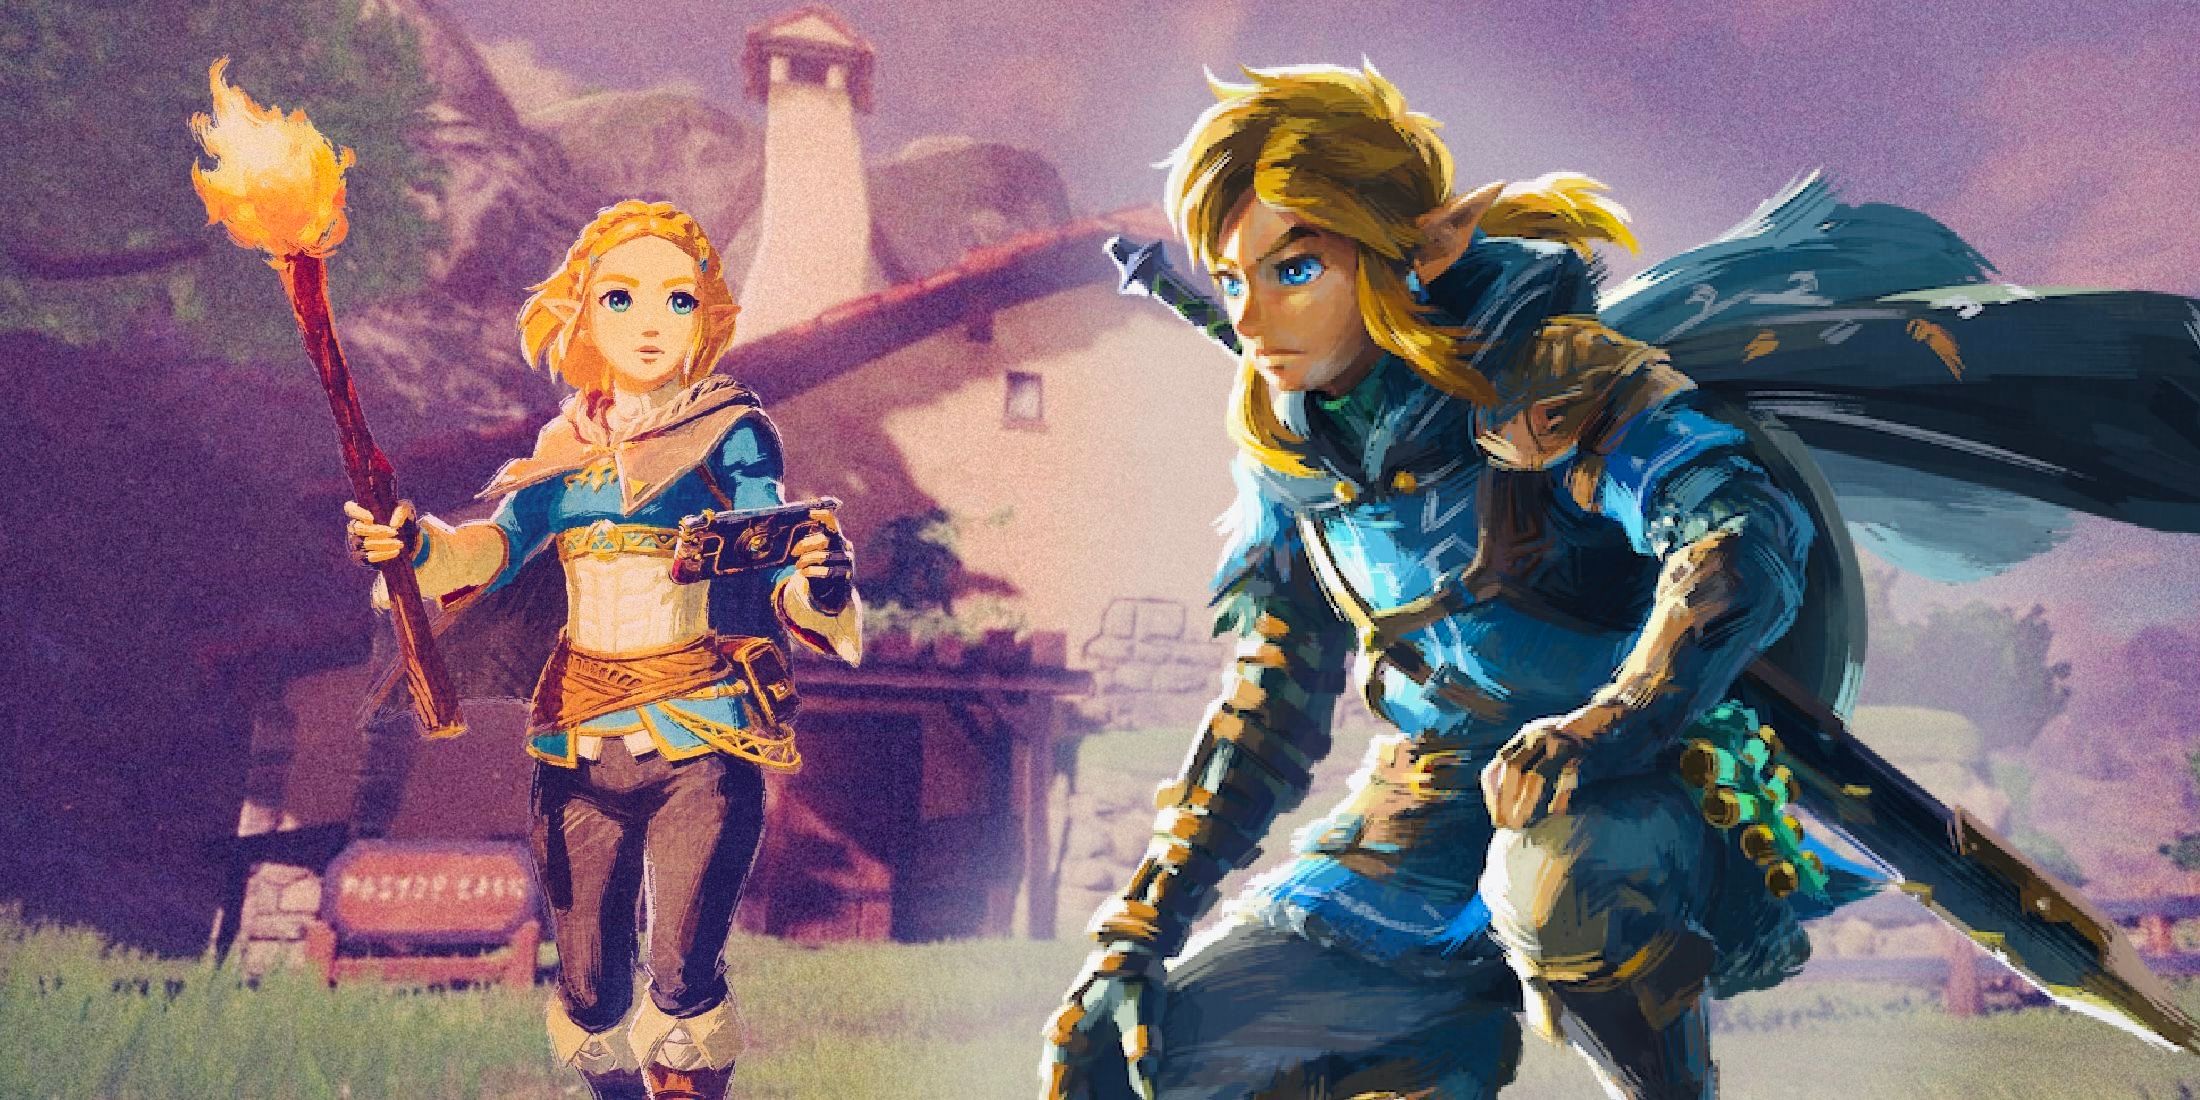 Link and Zelda living together in Hateno Village in Tears of the Kingdom